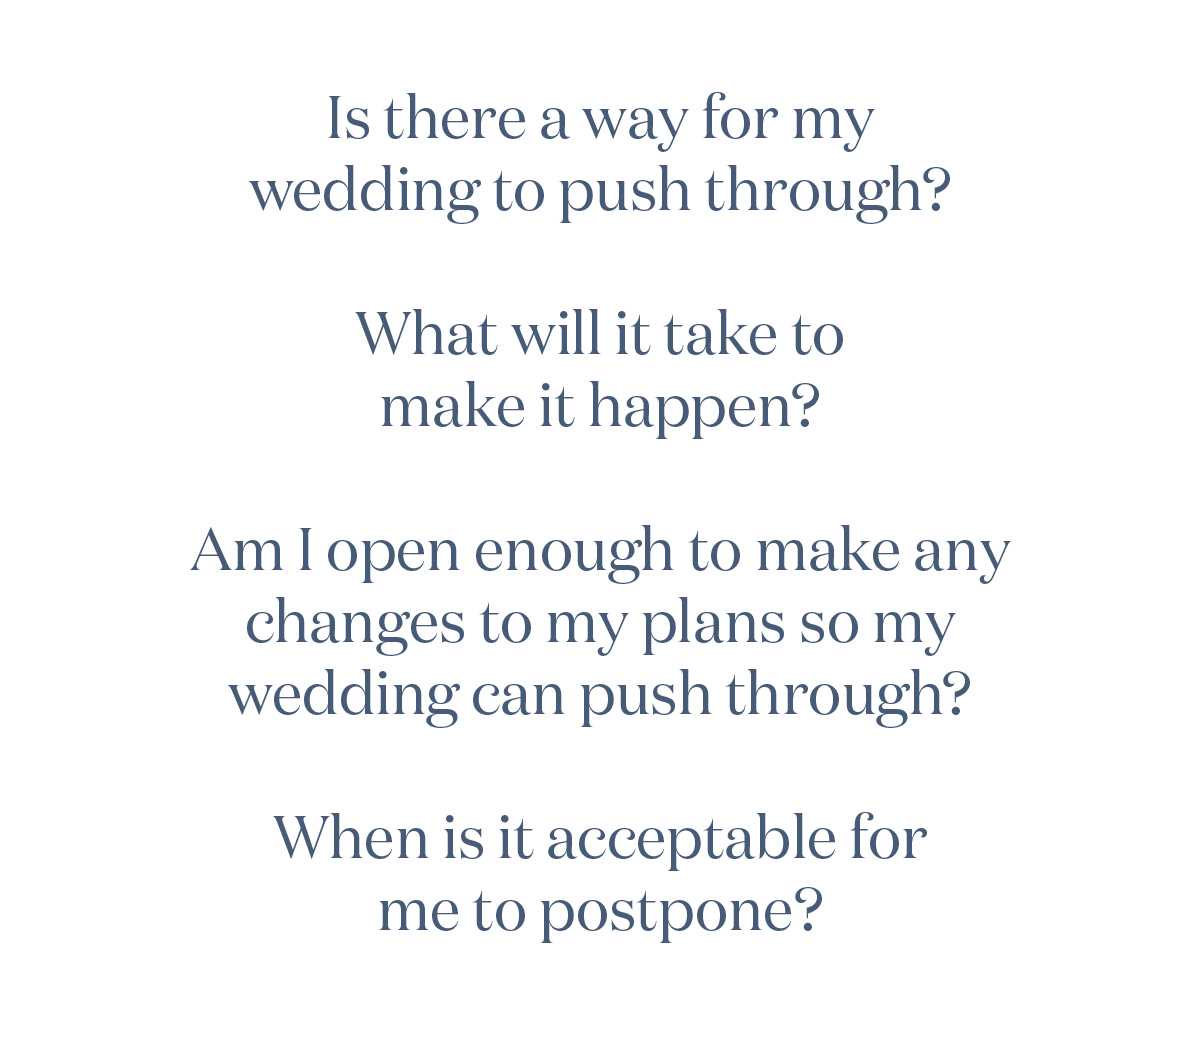 Is there a way for my wedding to push through? What will it take to make it happen? Am I open enough to make any changes to my plans so my wedding can push through? When is it acceptable for me to postpone?